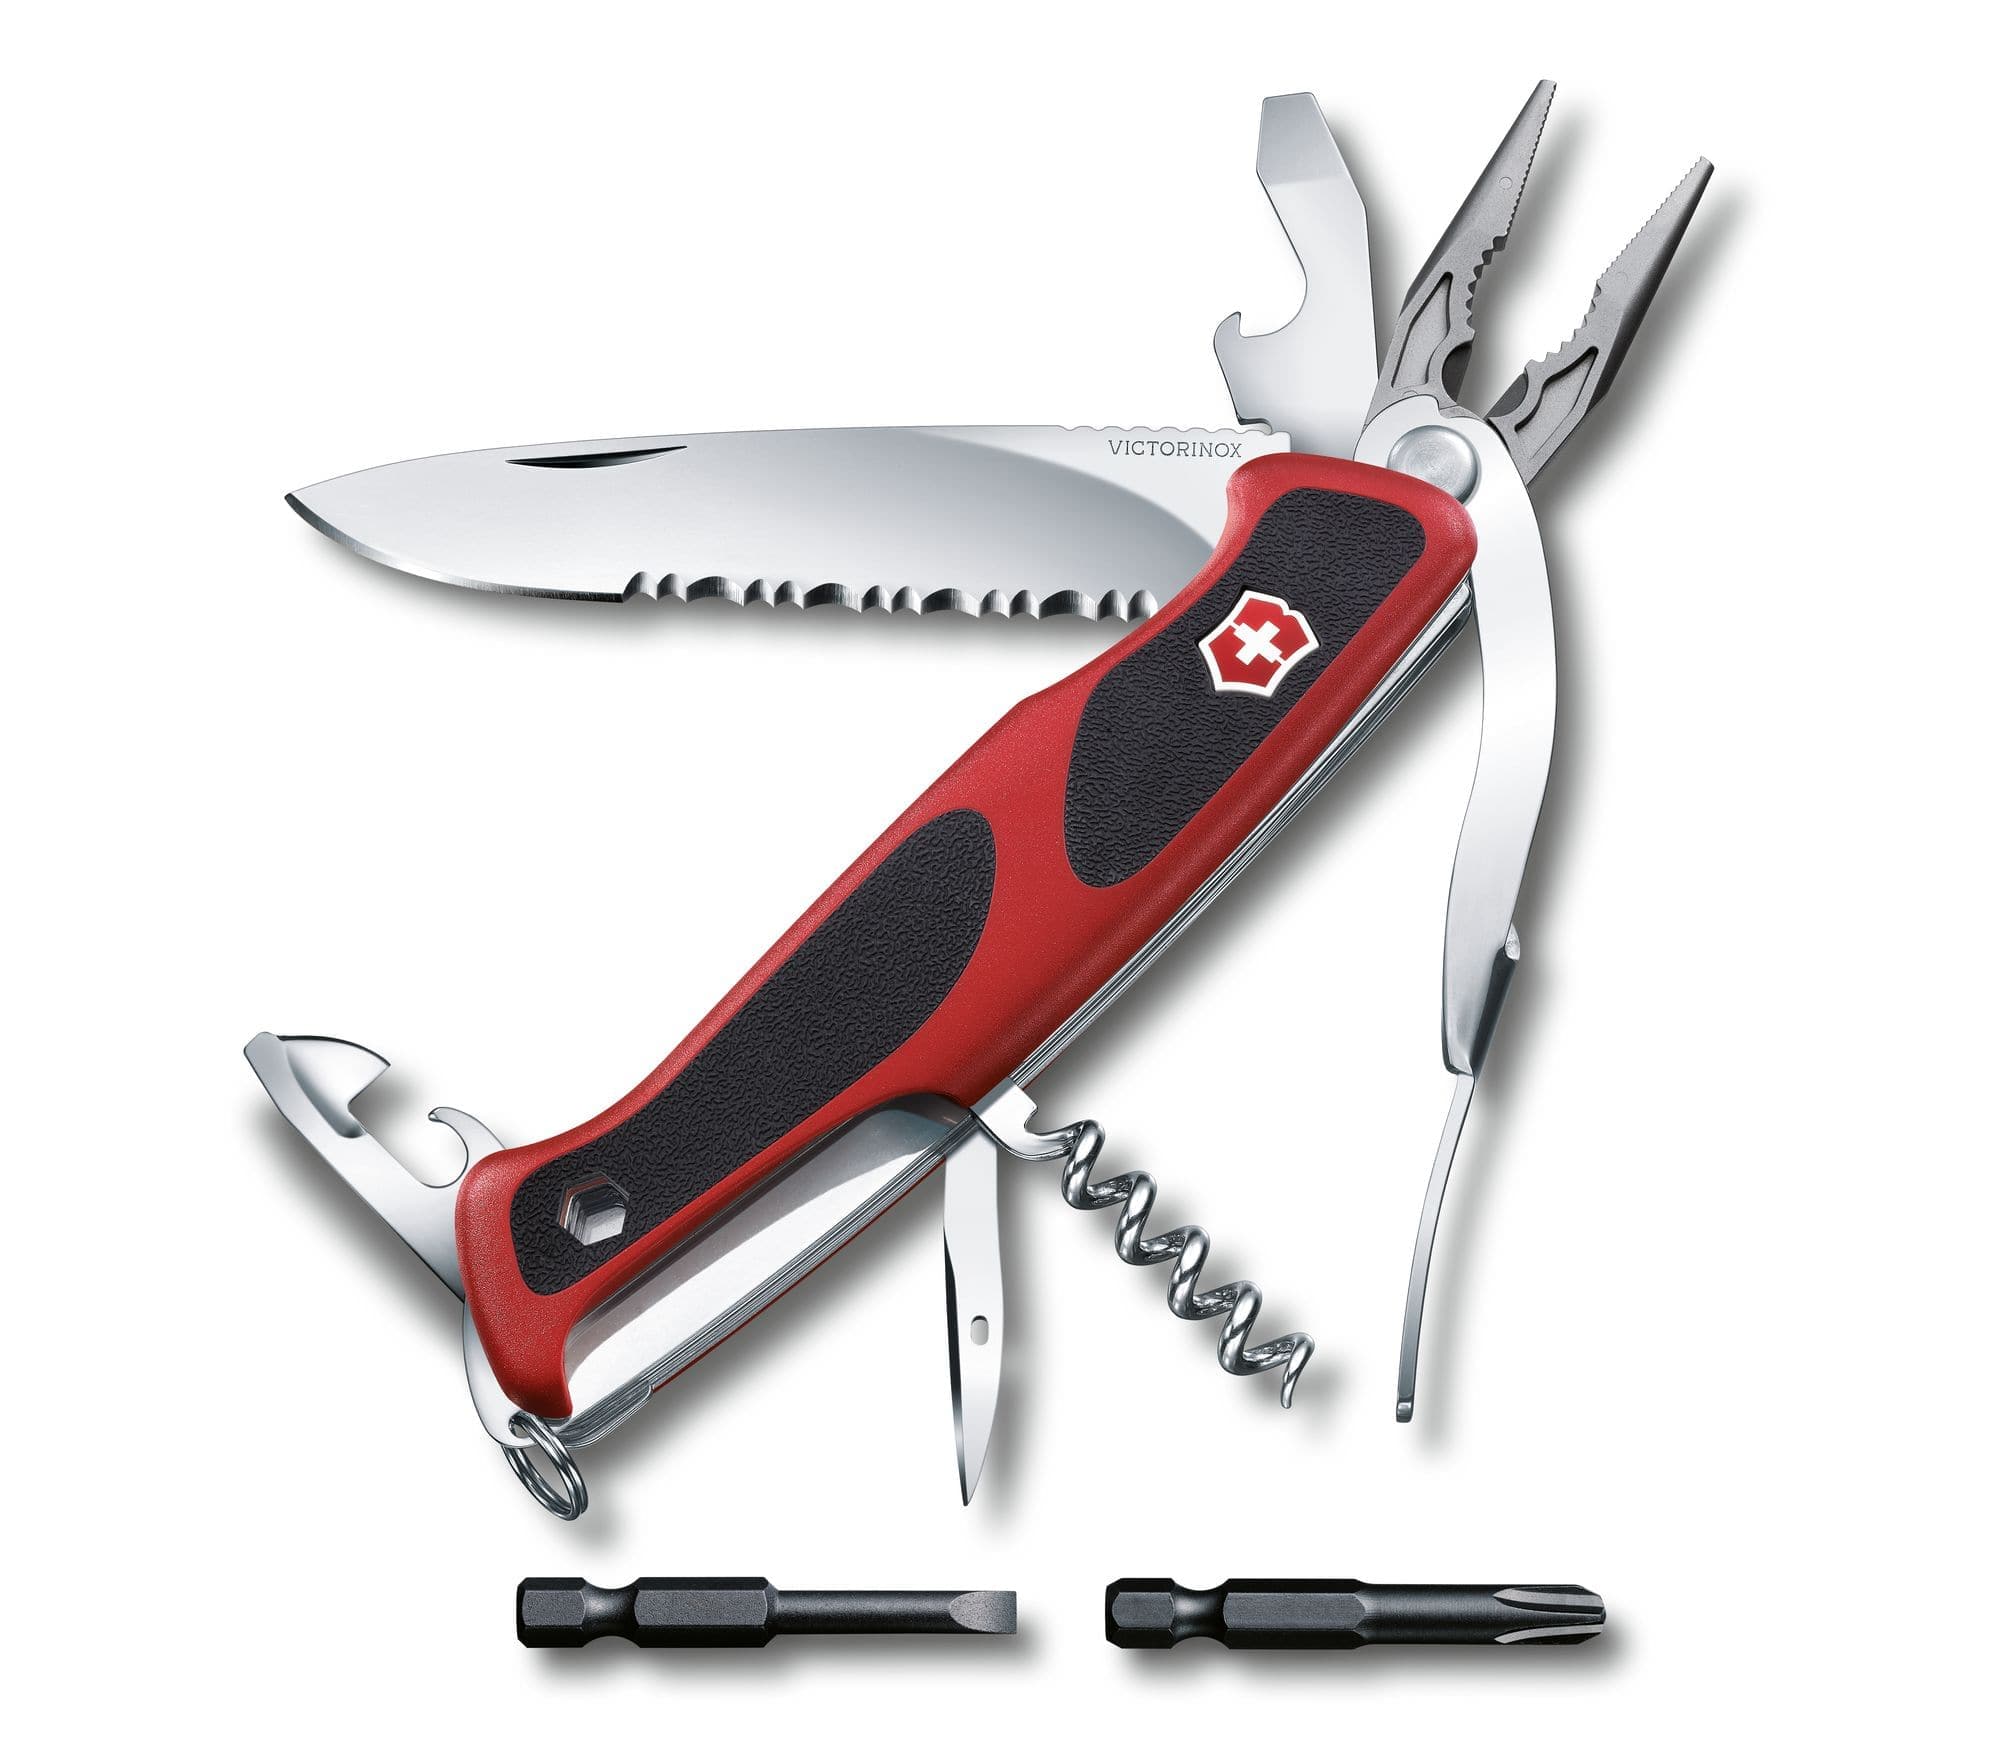 VICTORINOX SWISS ARMY KNIFE RANGERGRIP 174 HANDYMAN RED/BLACK WITH 17 FUNCTIONS - 0.9728.WC